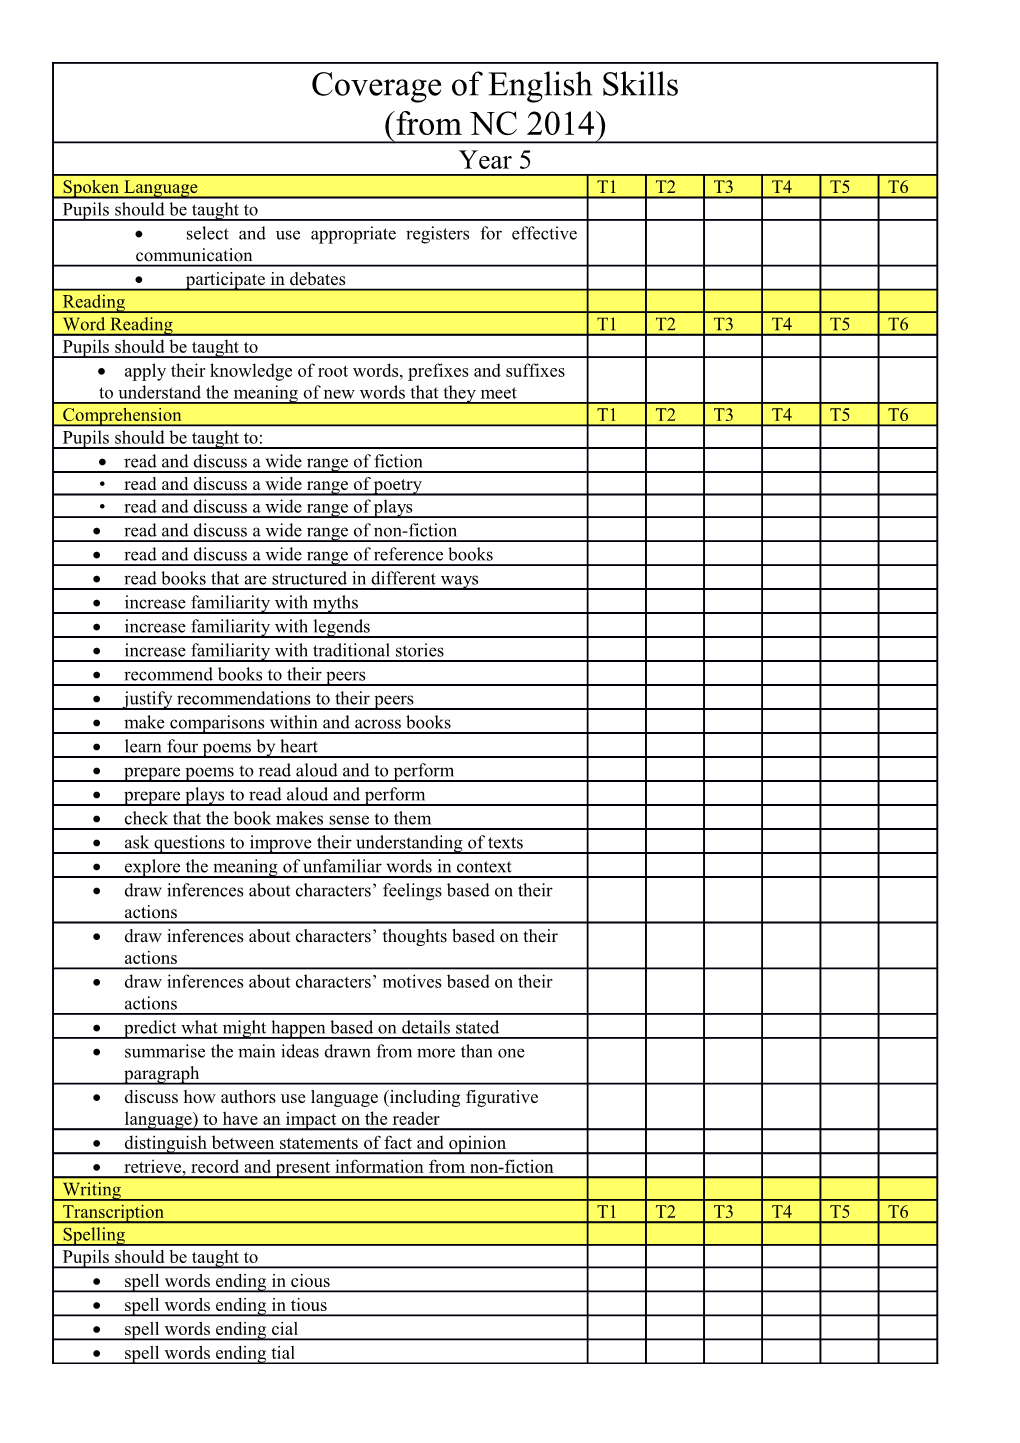 Select and Use Appropriate Registers for Effective Communication